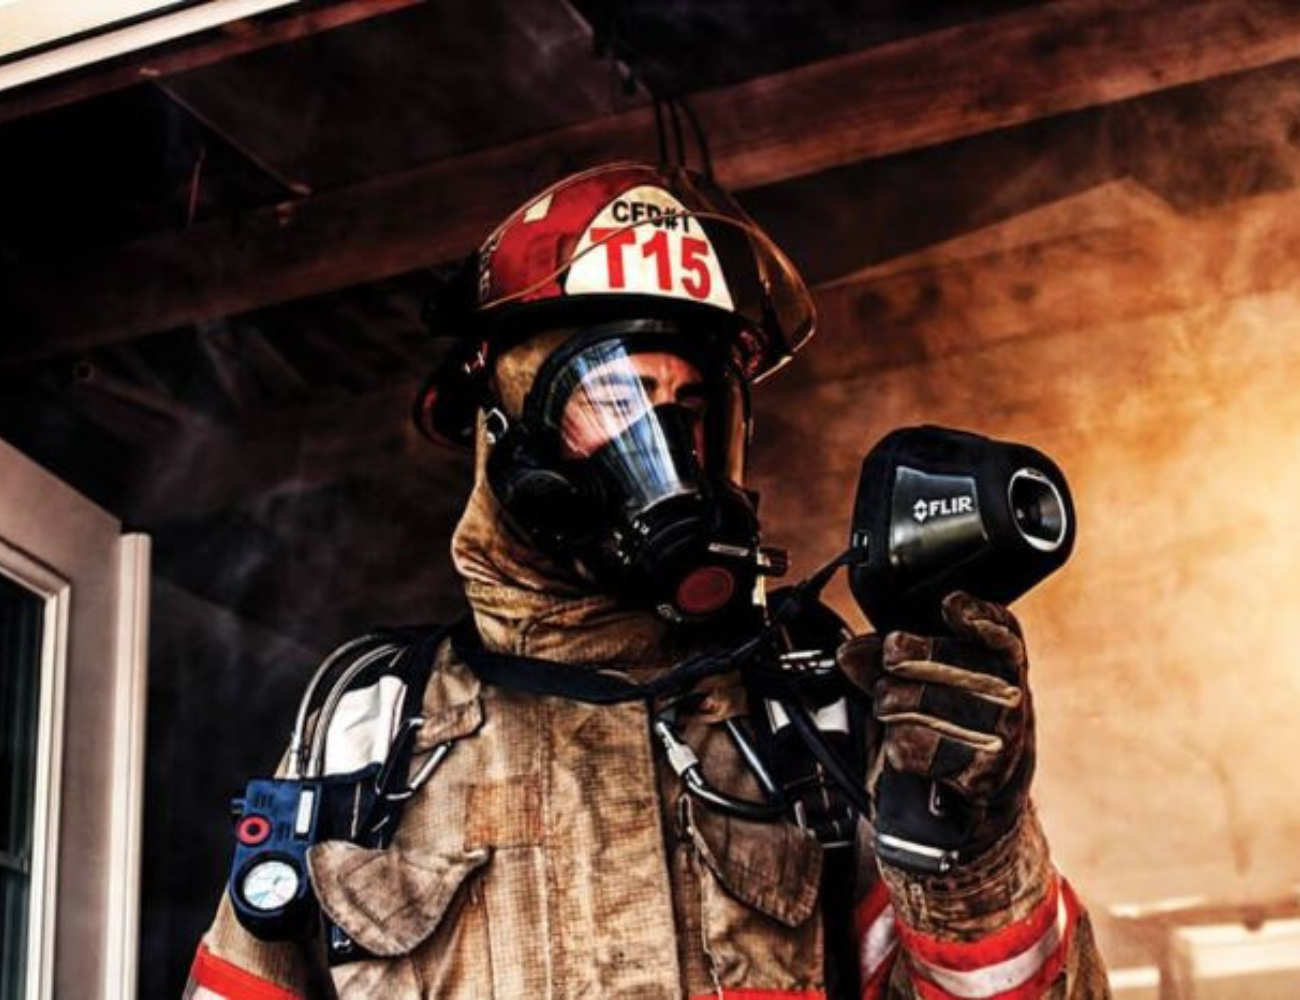 firefighter with flir thermal imager